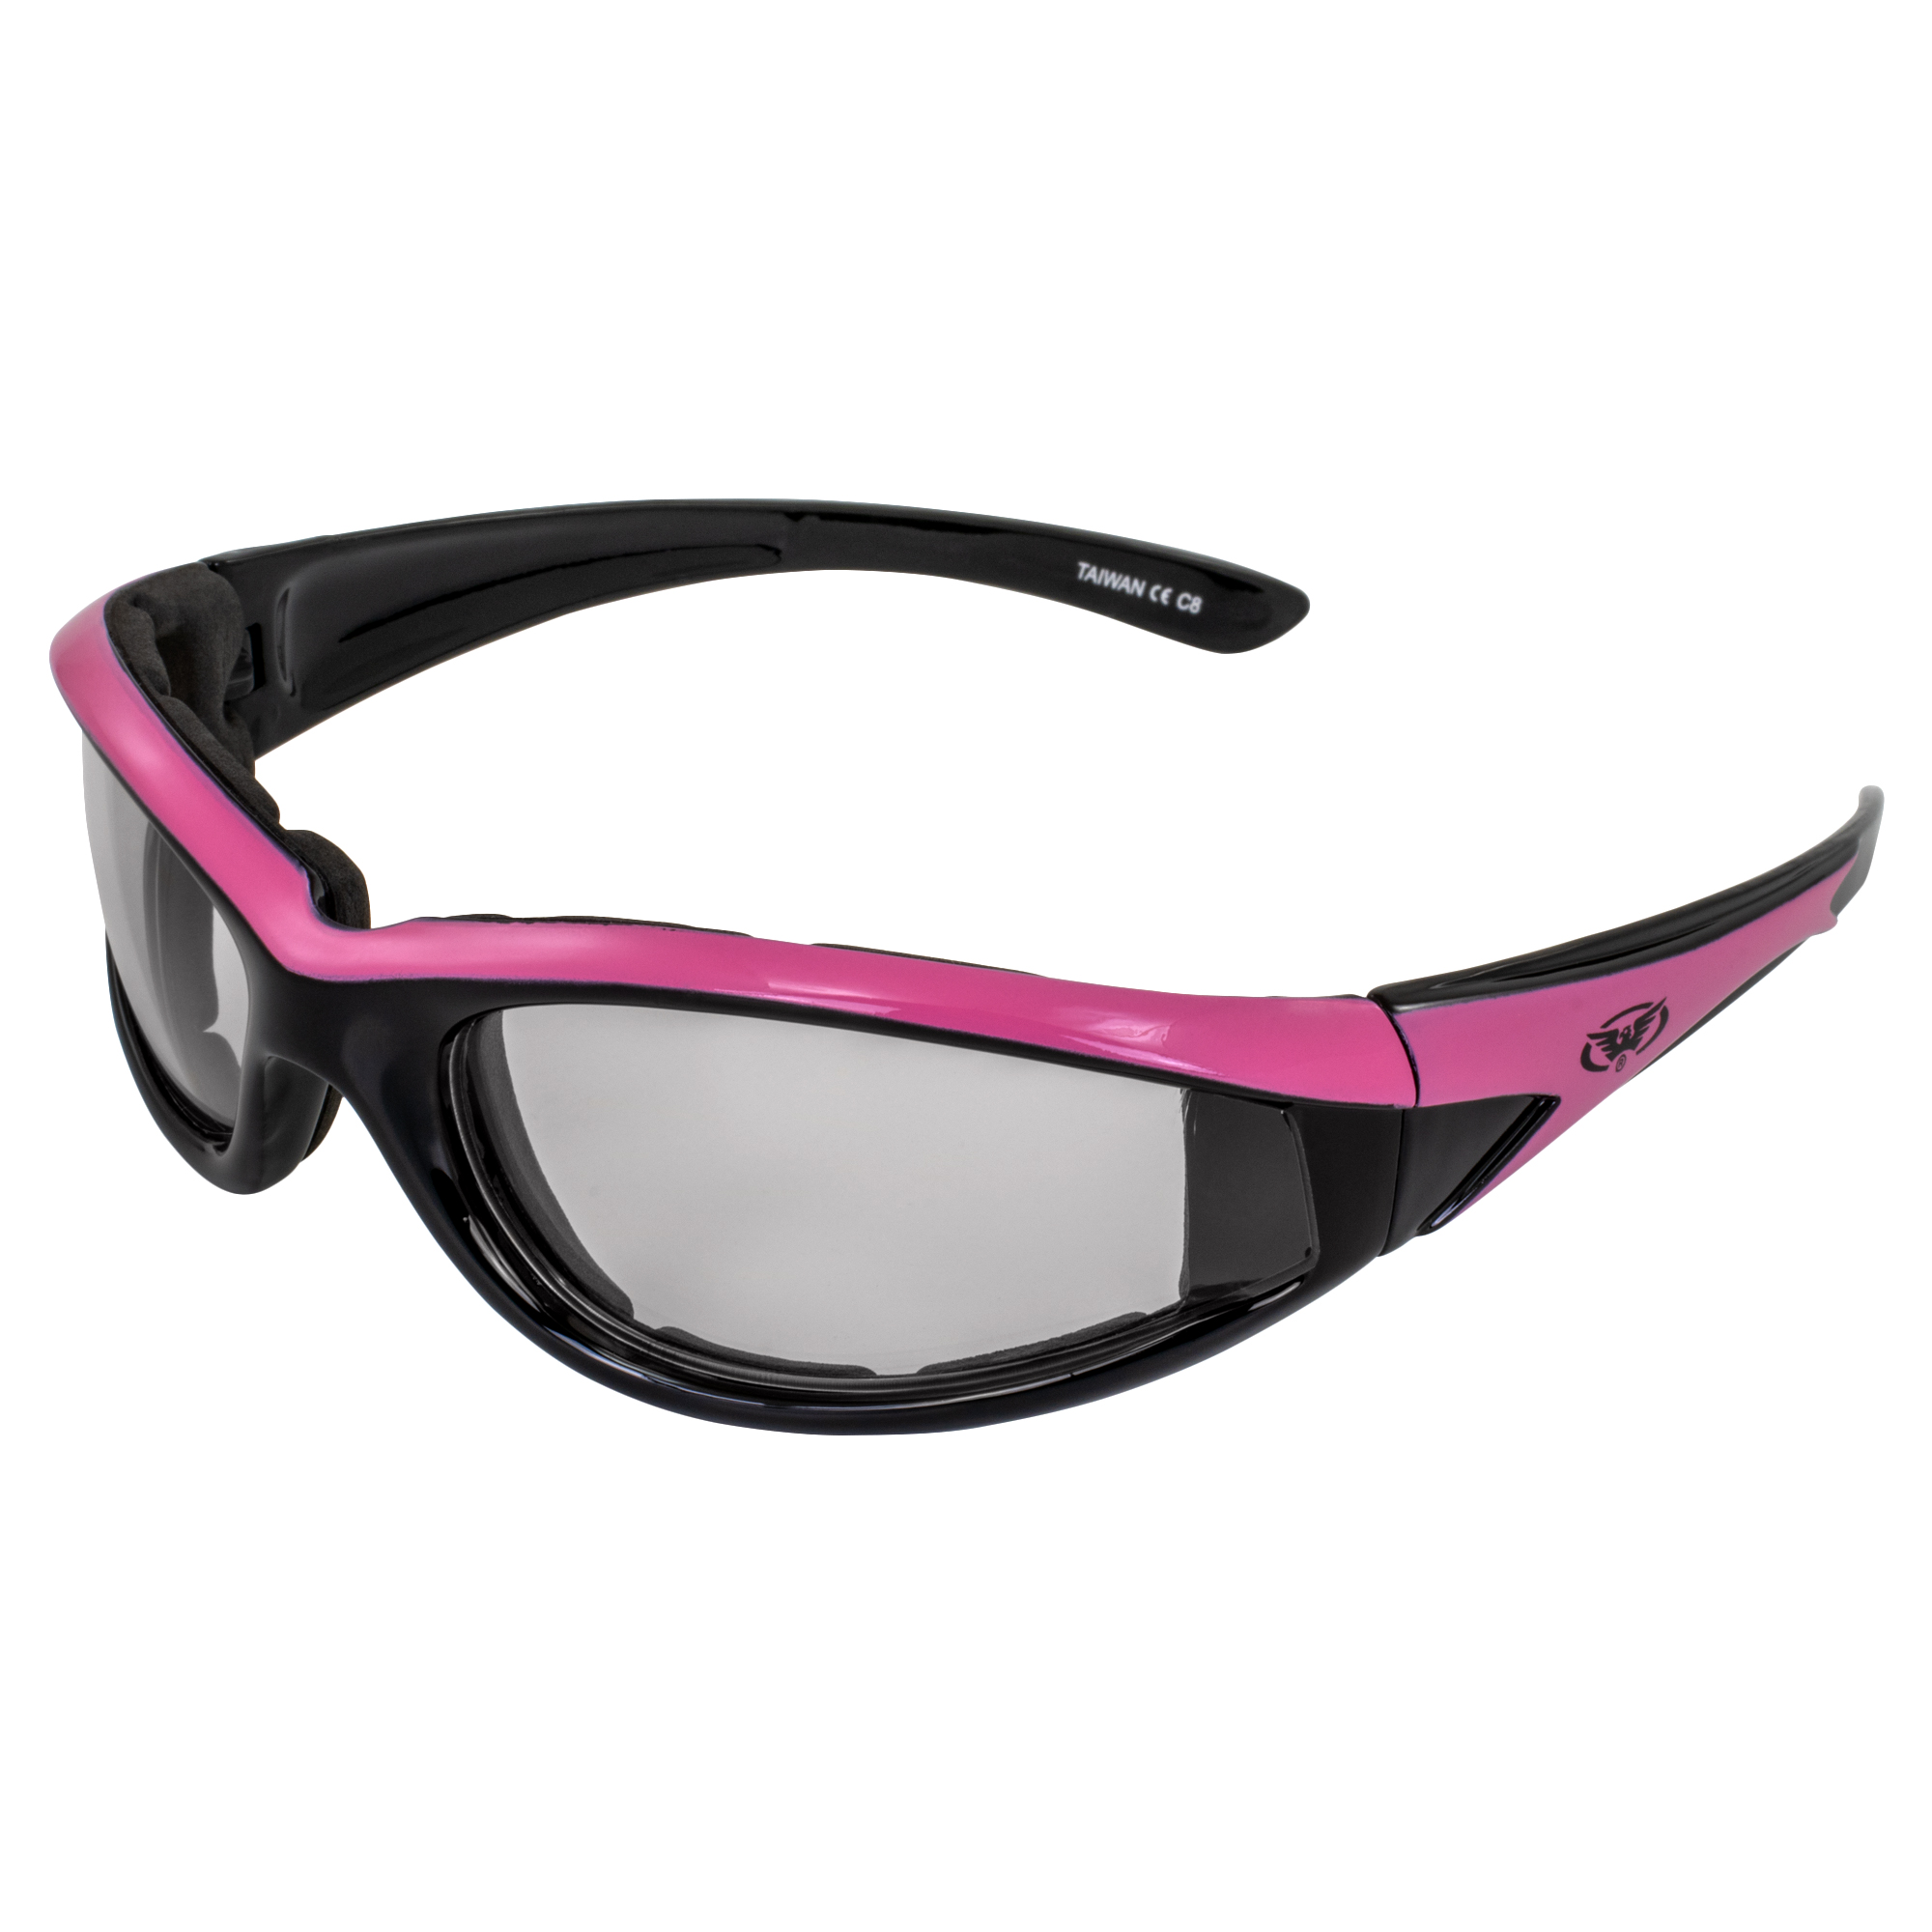 Global Vision Eyewear Hawkeye-24 Padded Motorcycle Riding Sunglasses with Dual Color Frames and Clear to Smoke Photochromic Lenses - image 1 of 8